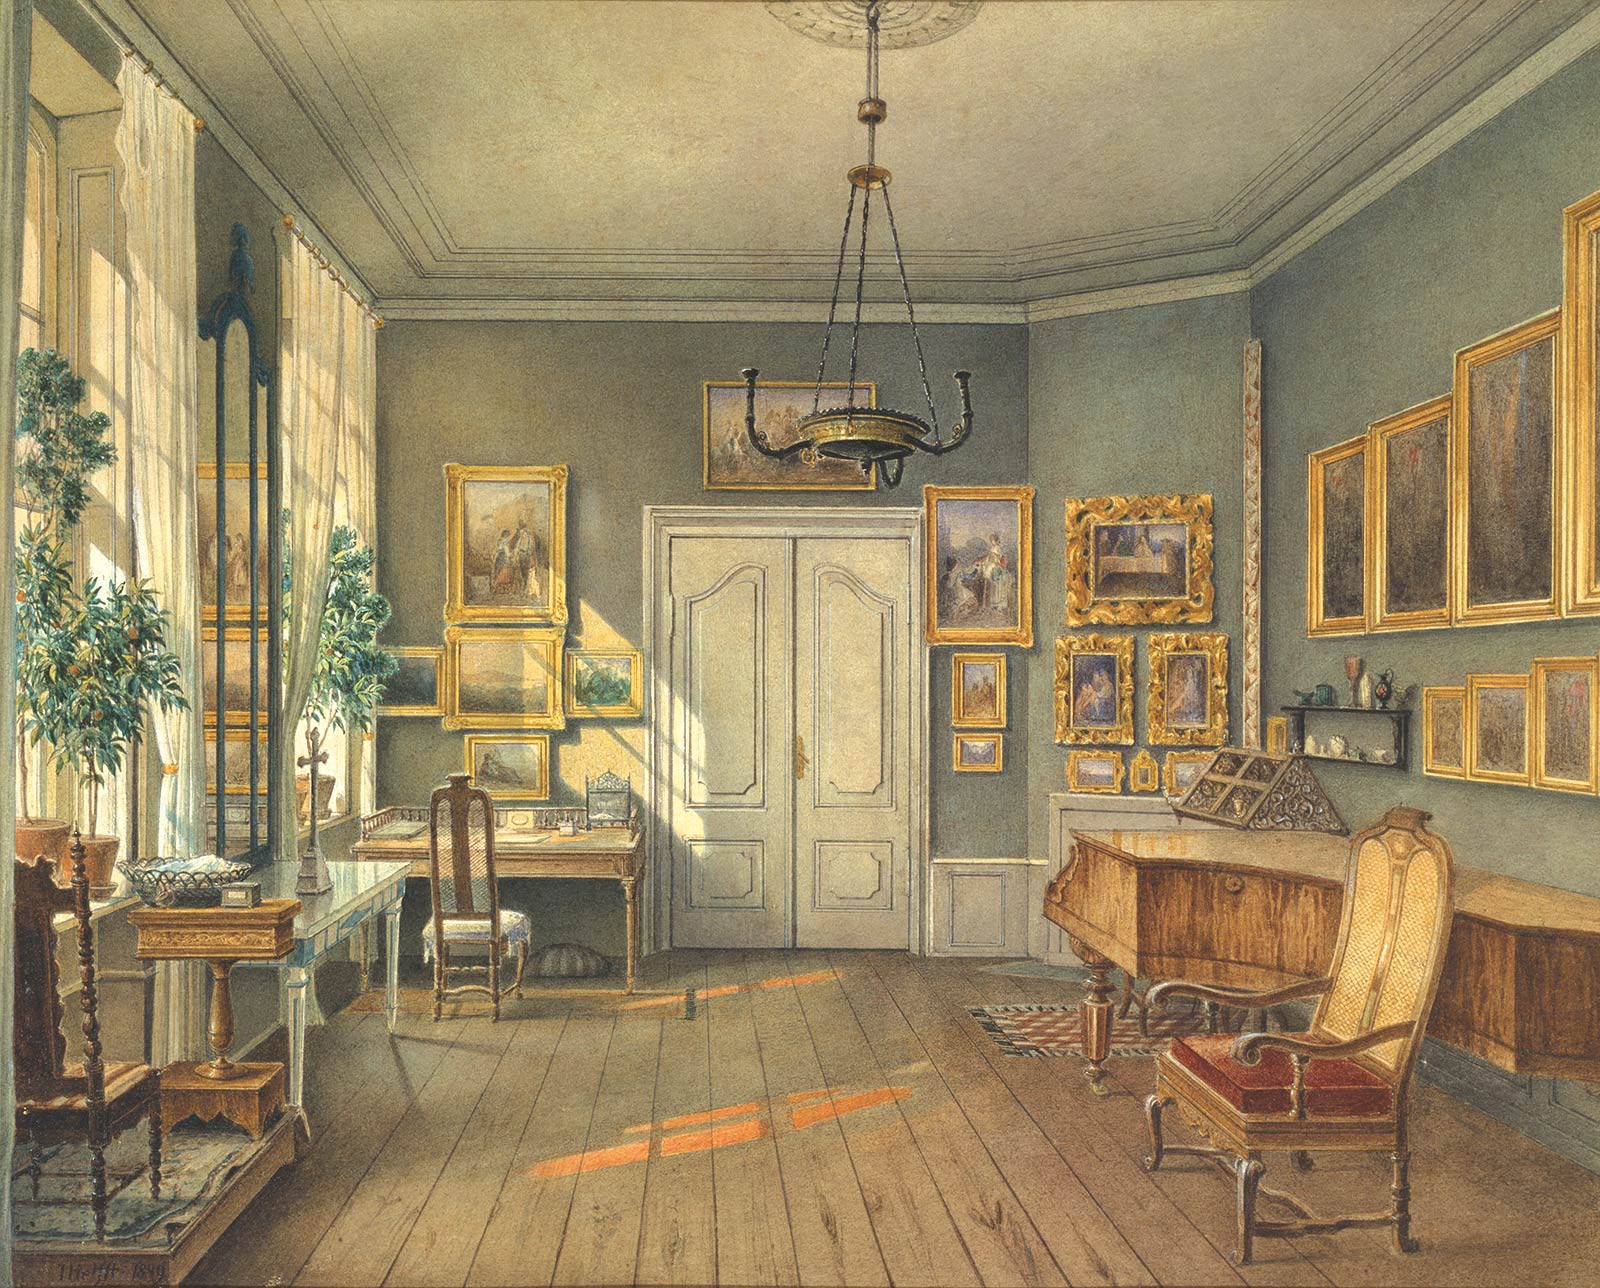 Fanny’s music room with piano, sewing table, and paintings by her husband.  Julius Helfft, “The Music Room of Fanny Hensel,” 1849, Cooper Hewitt, National Design Museum, New York.